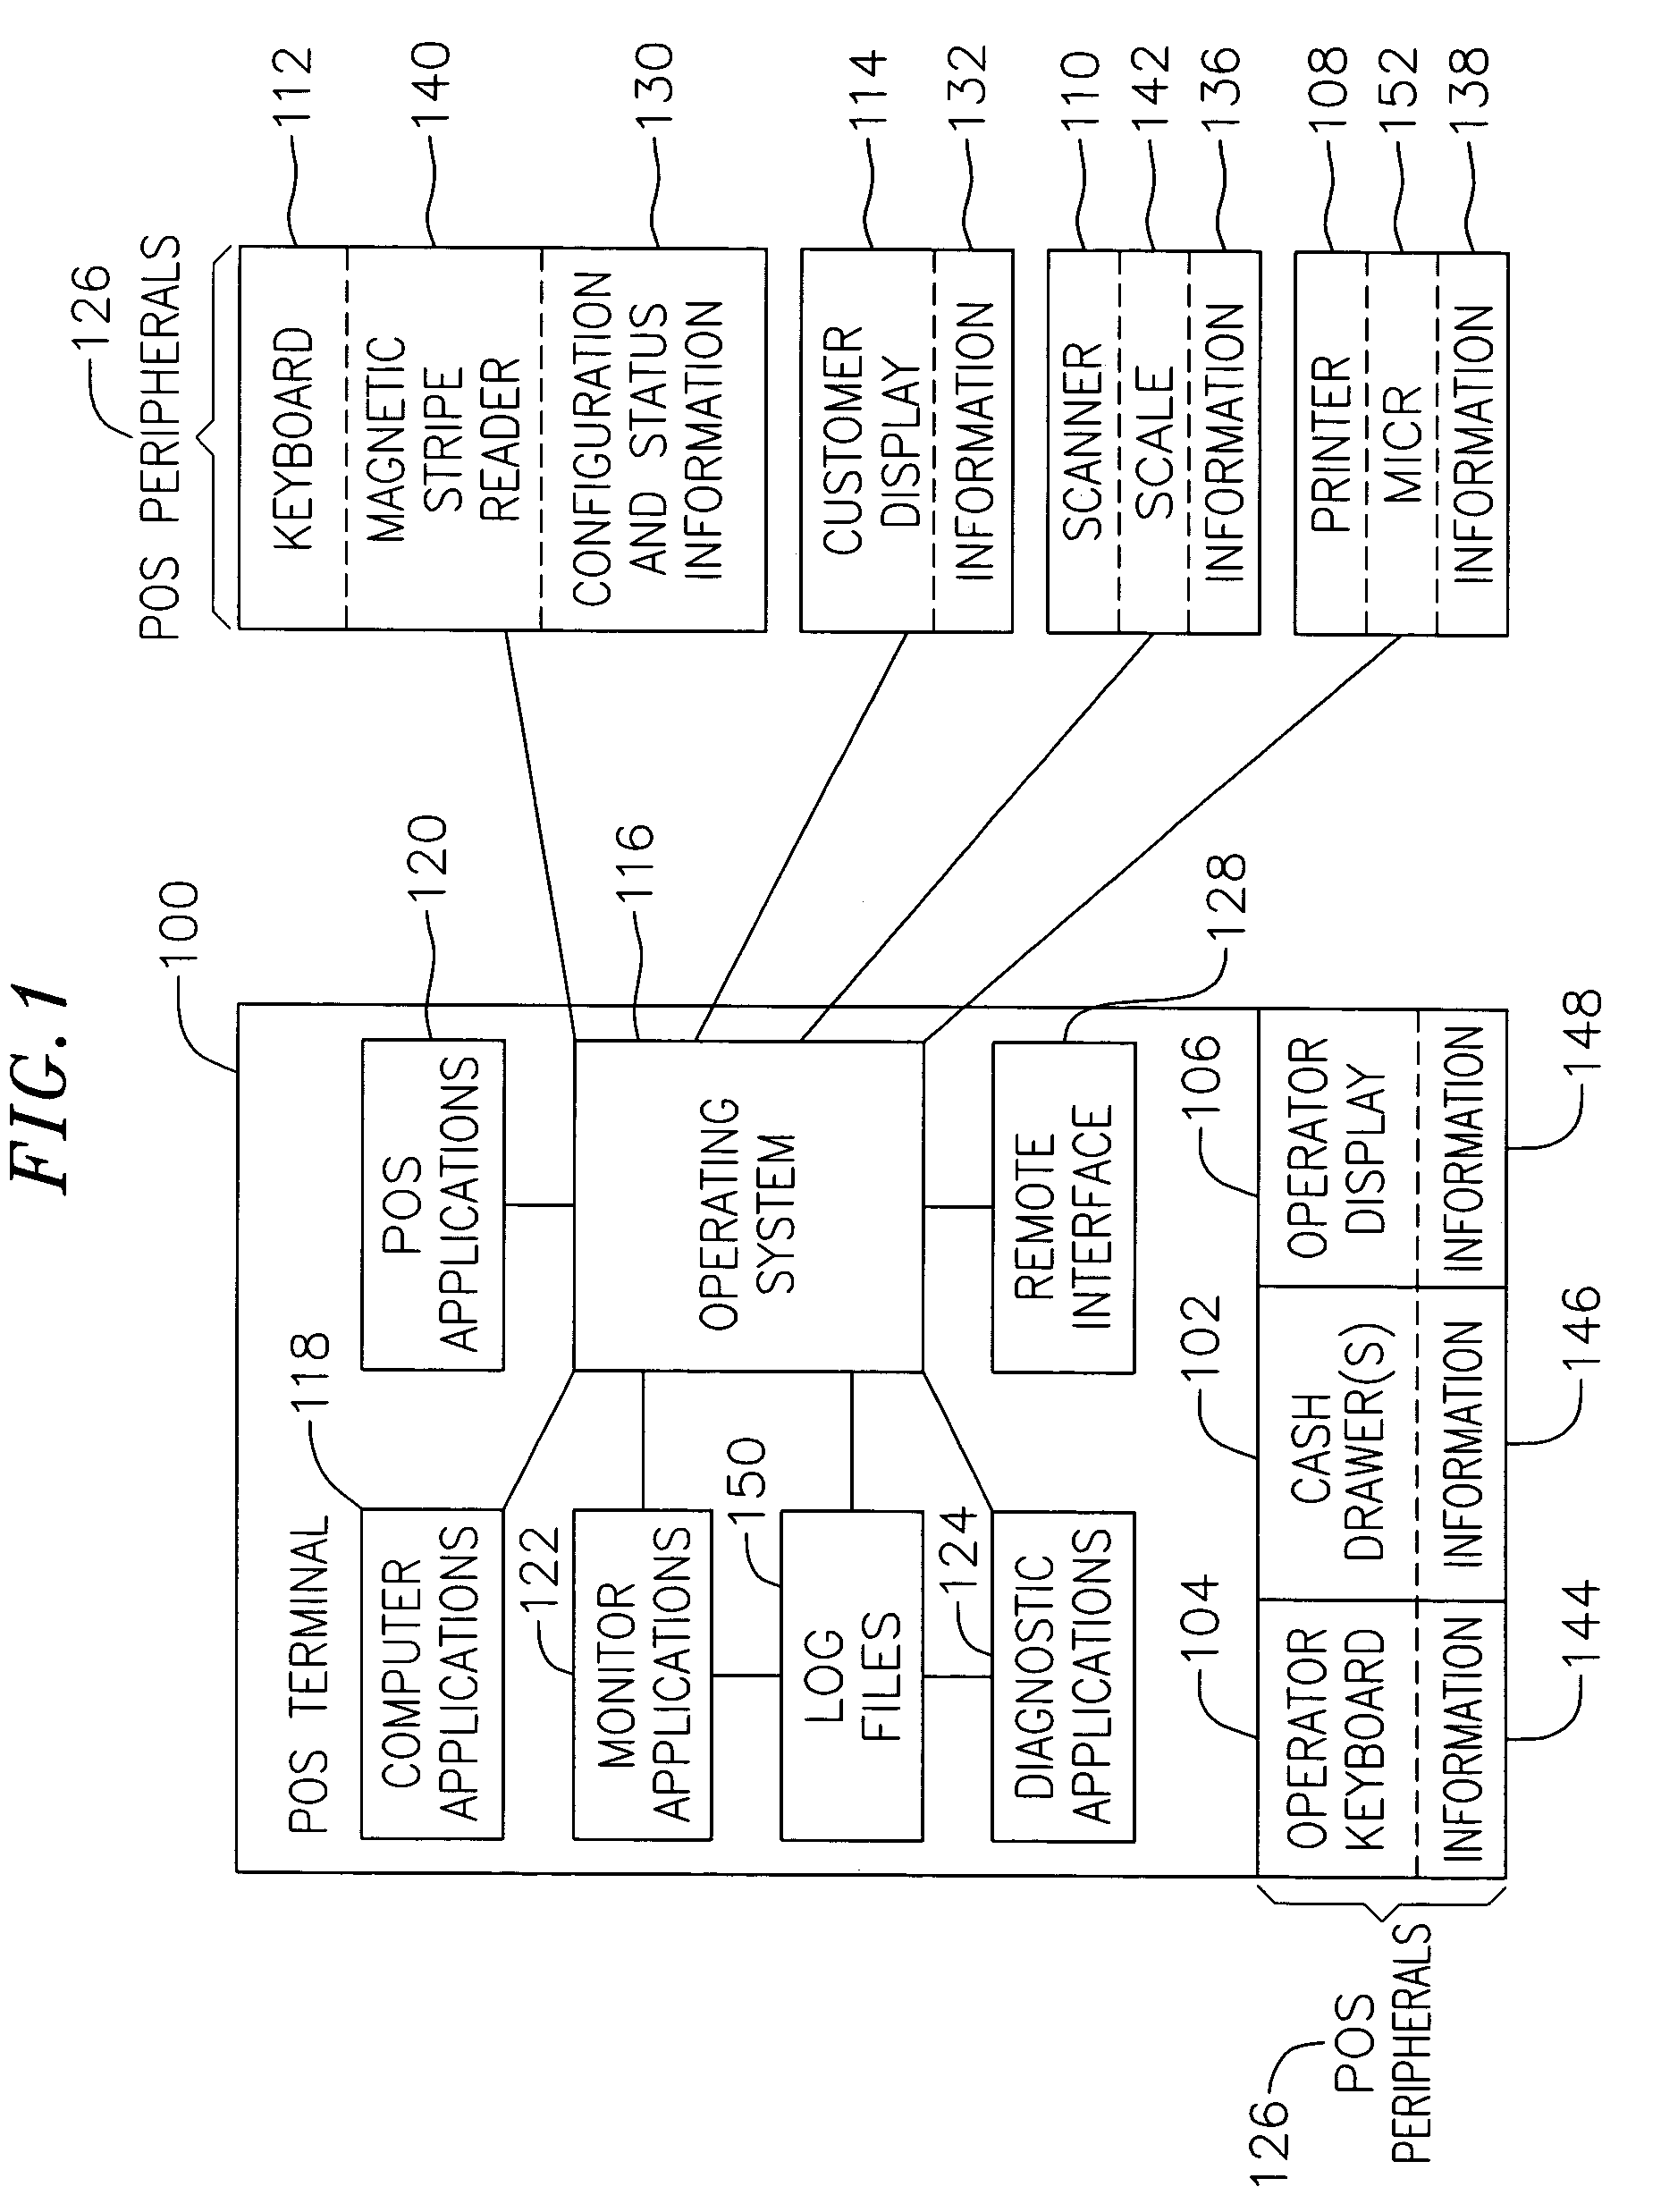 System and method for monitoring and diagnosis of point of sale devices having intelligent hardware